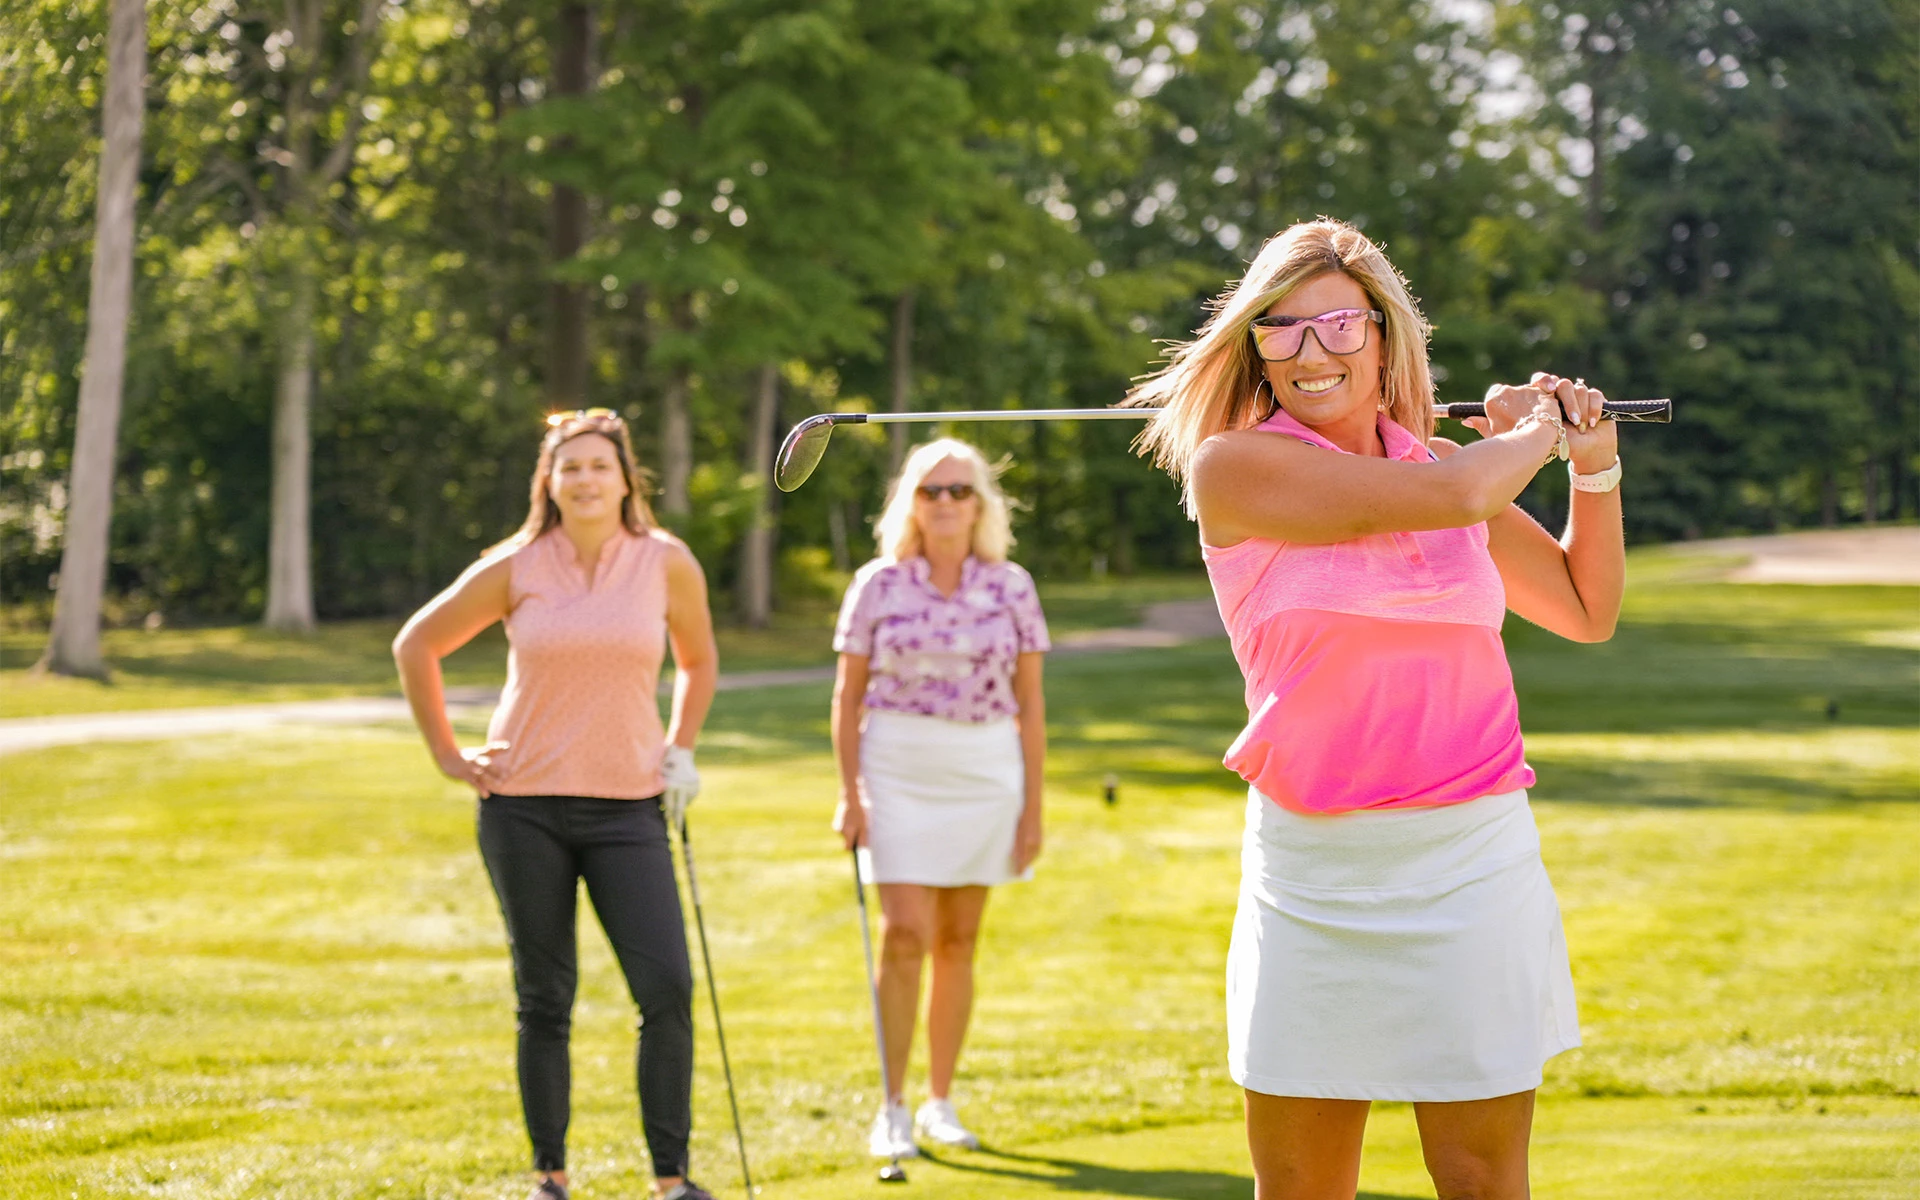 The Game On Adult Golf Lesson Program at an Invited Club